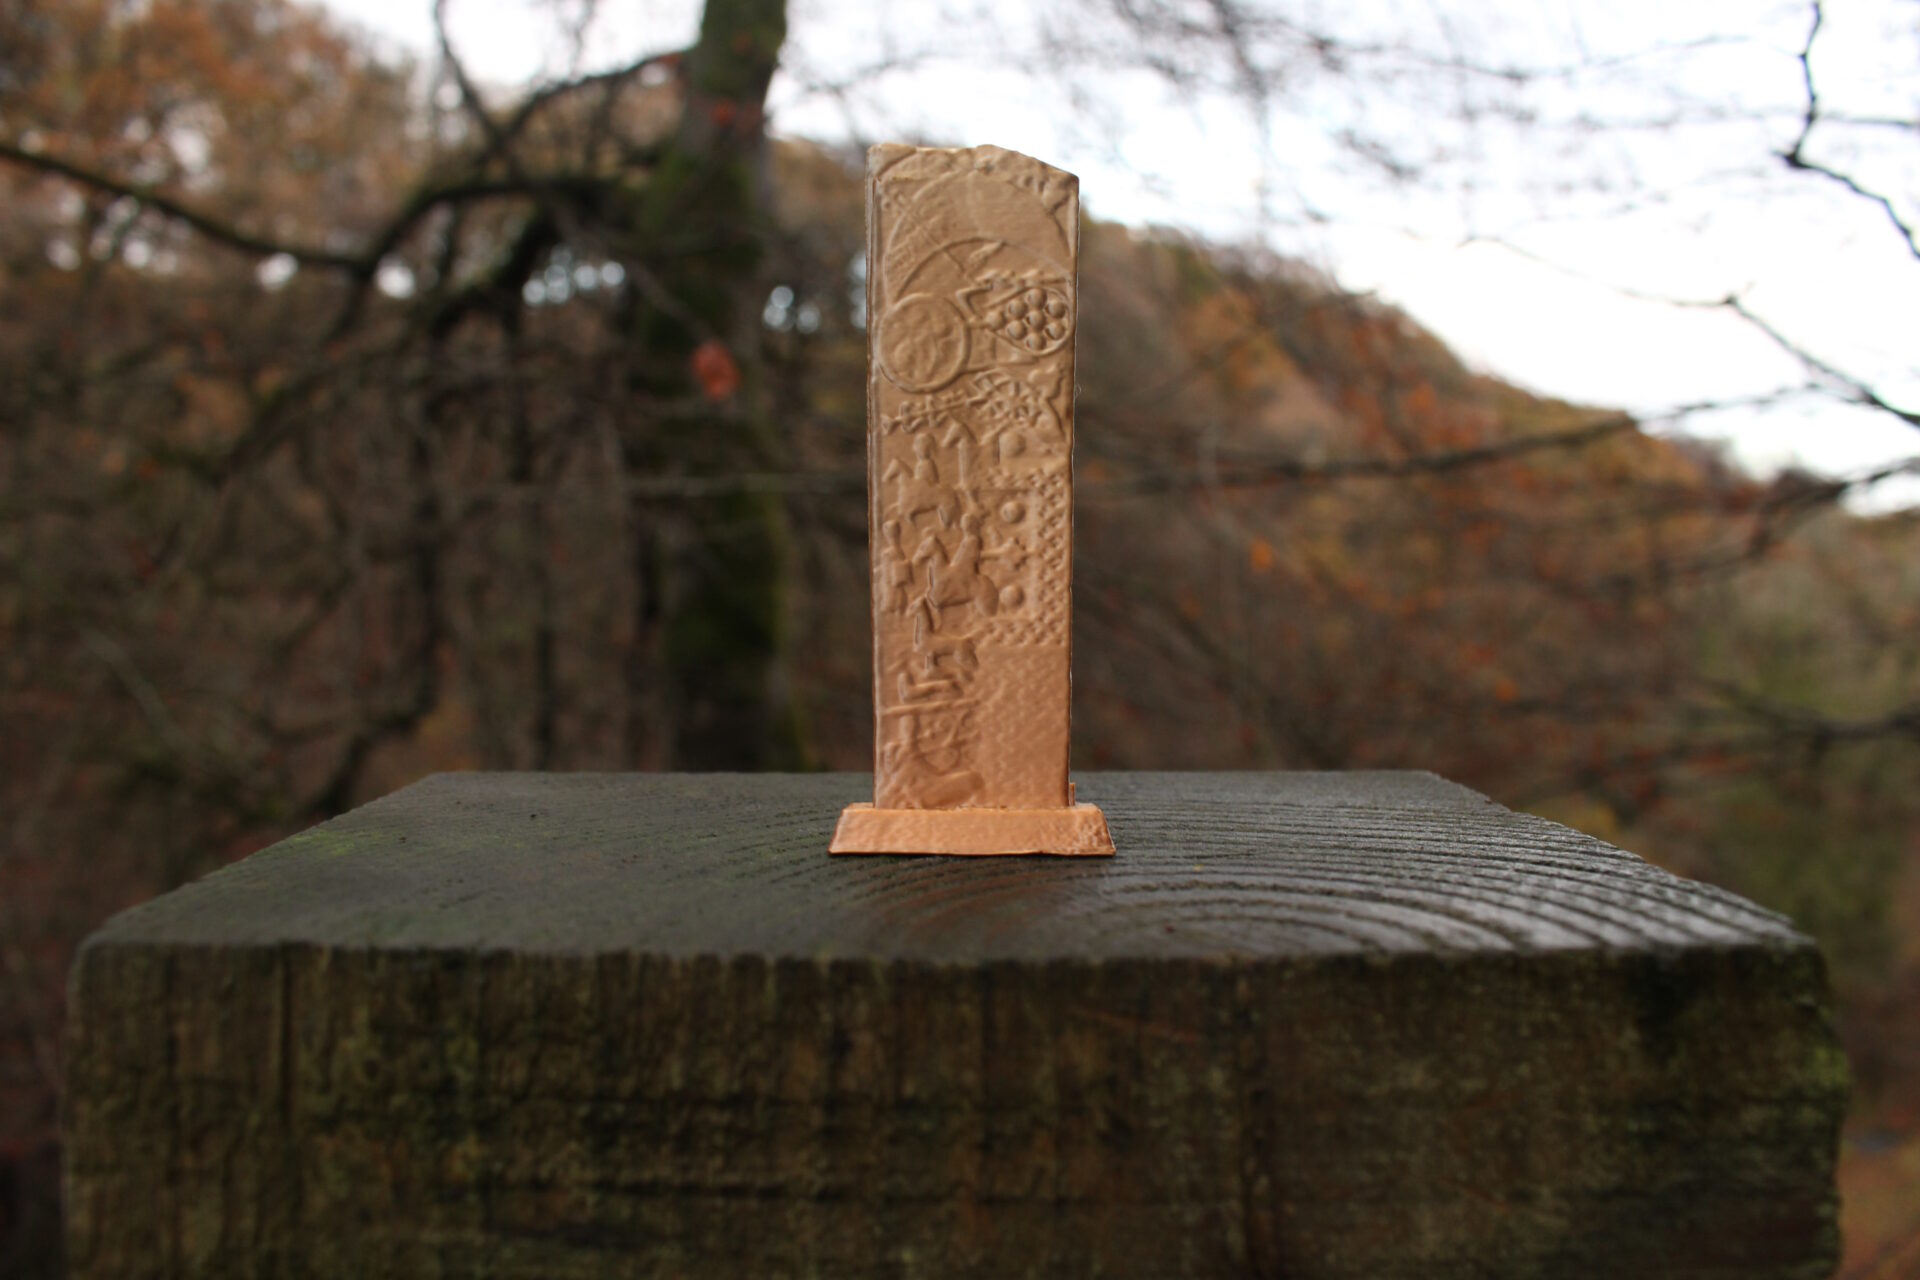 Pictish Stone Remix 3D Printed Sculpture in Silk Metal against a woodland scene.